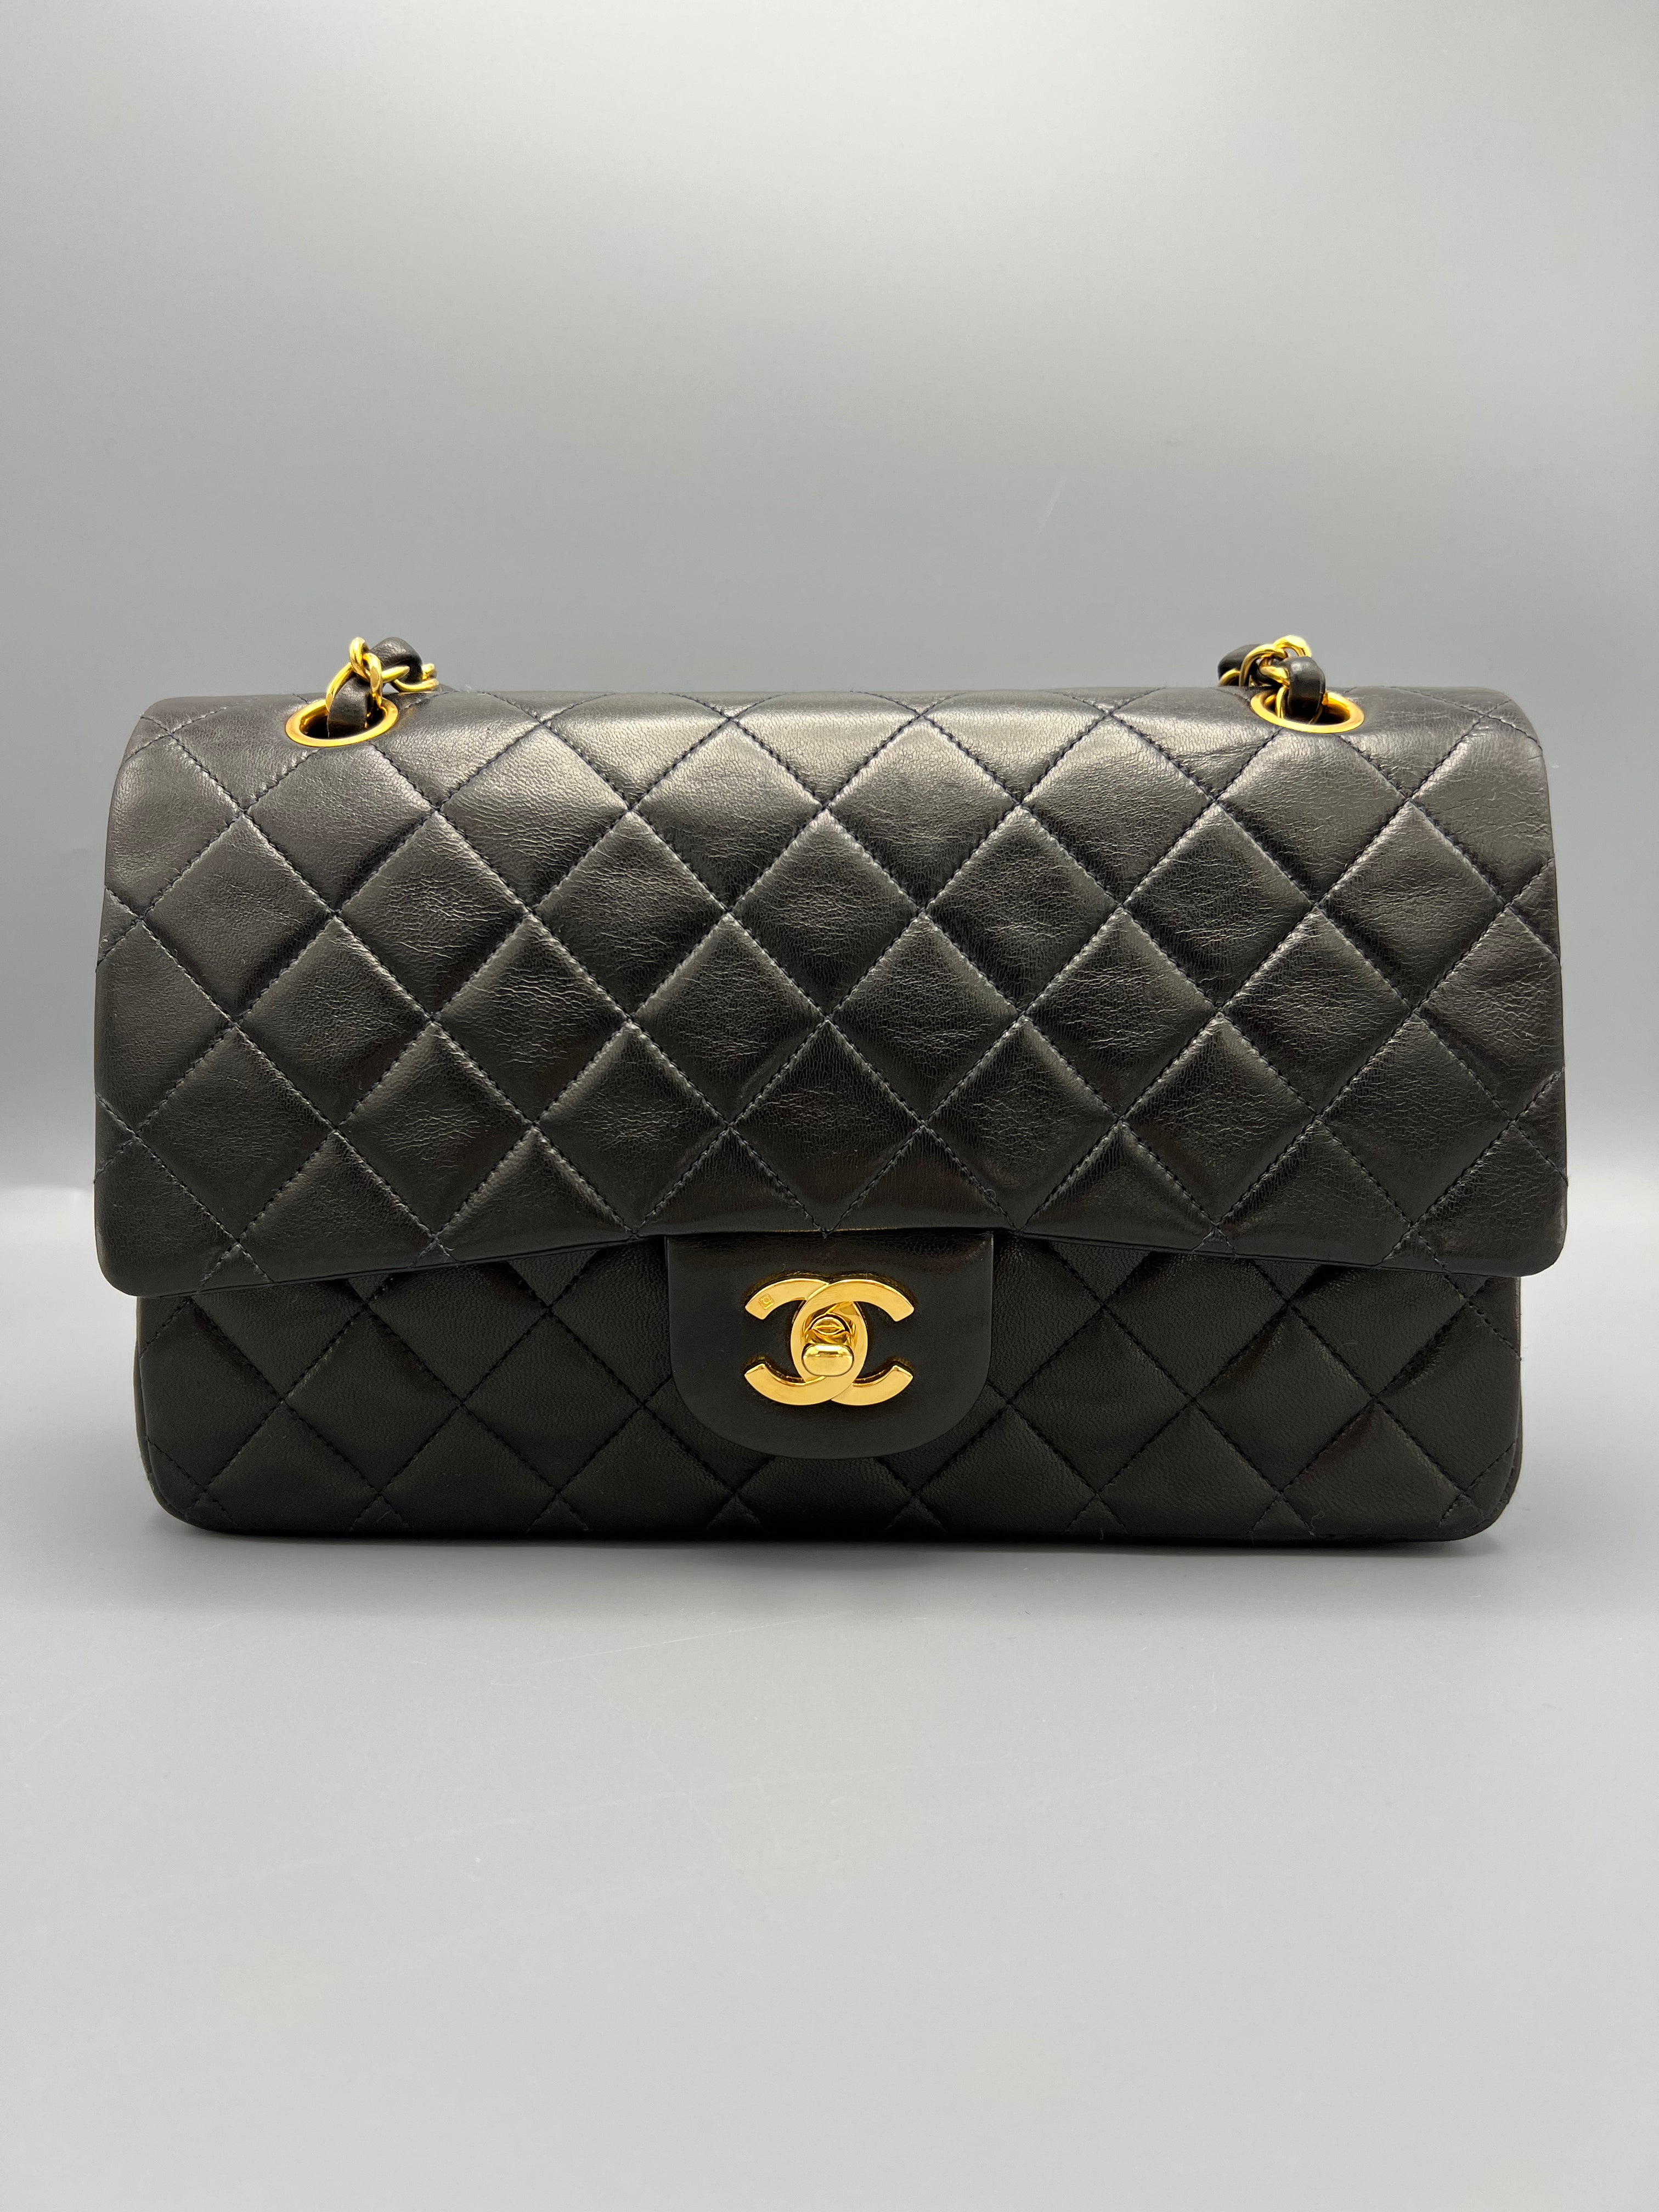 Pre-Owned Chanel Black Medium Double Flap Bag